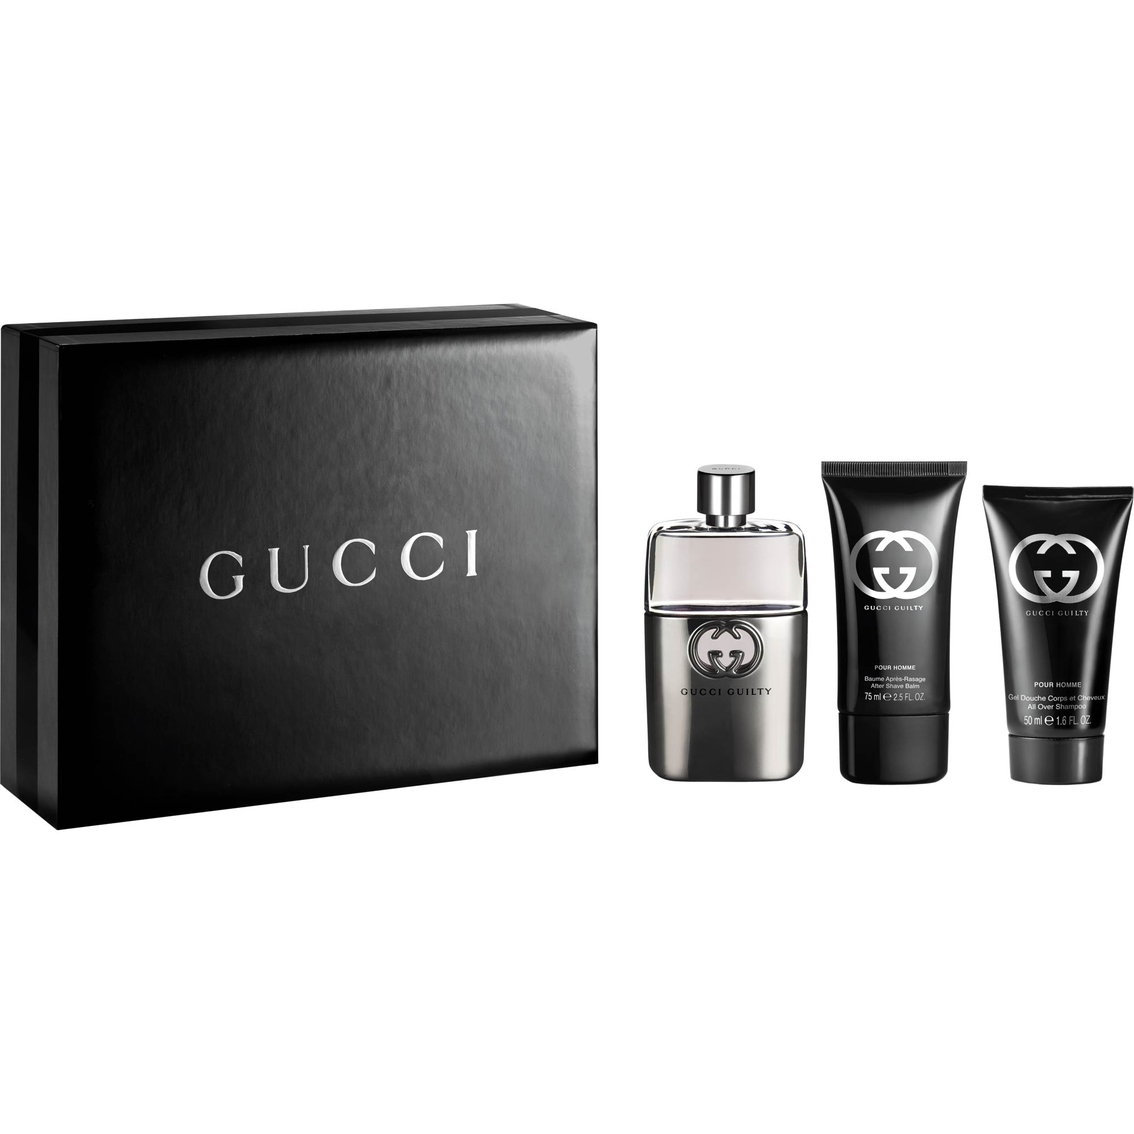 Gucci Guilty Pour Homme Fragrance 3 Pc. Gift Set Gifts